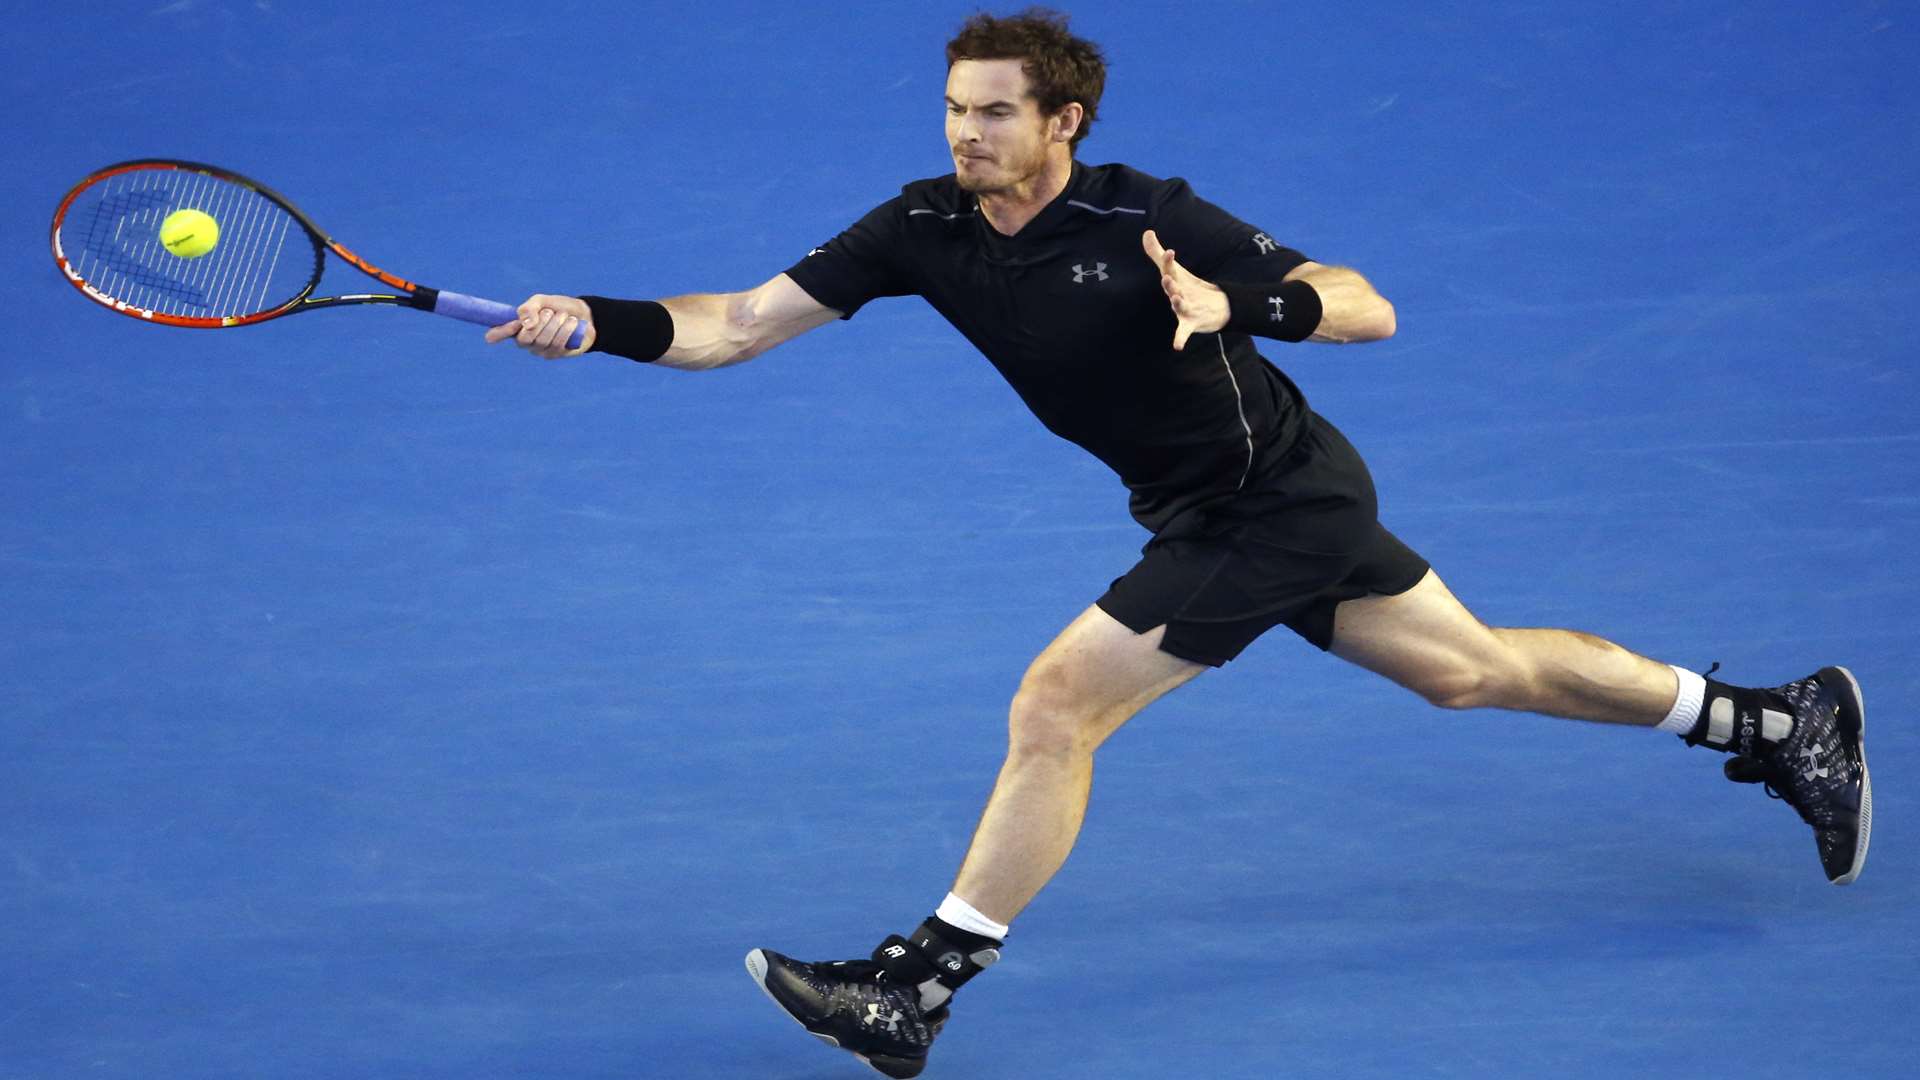 Current Olympic champion Andy Murray